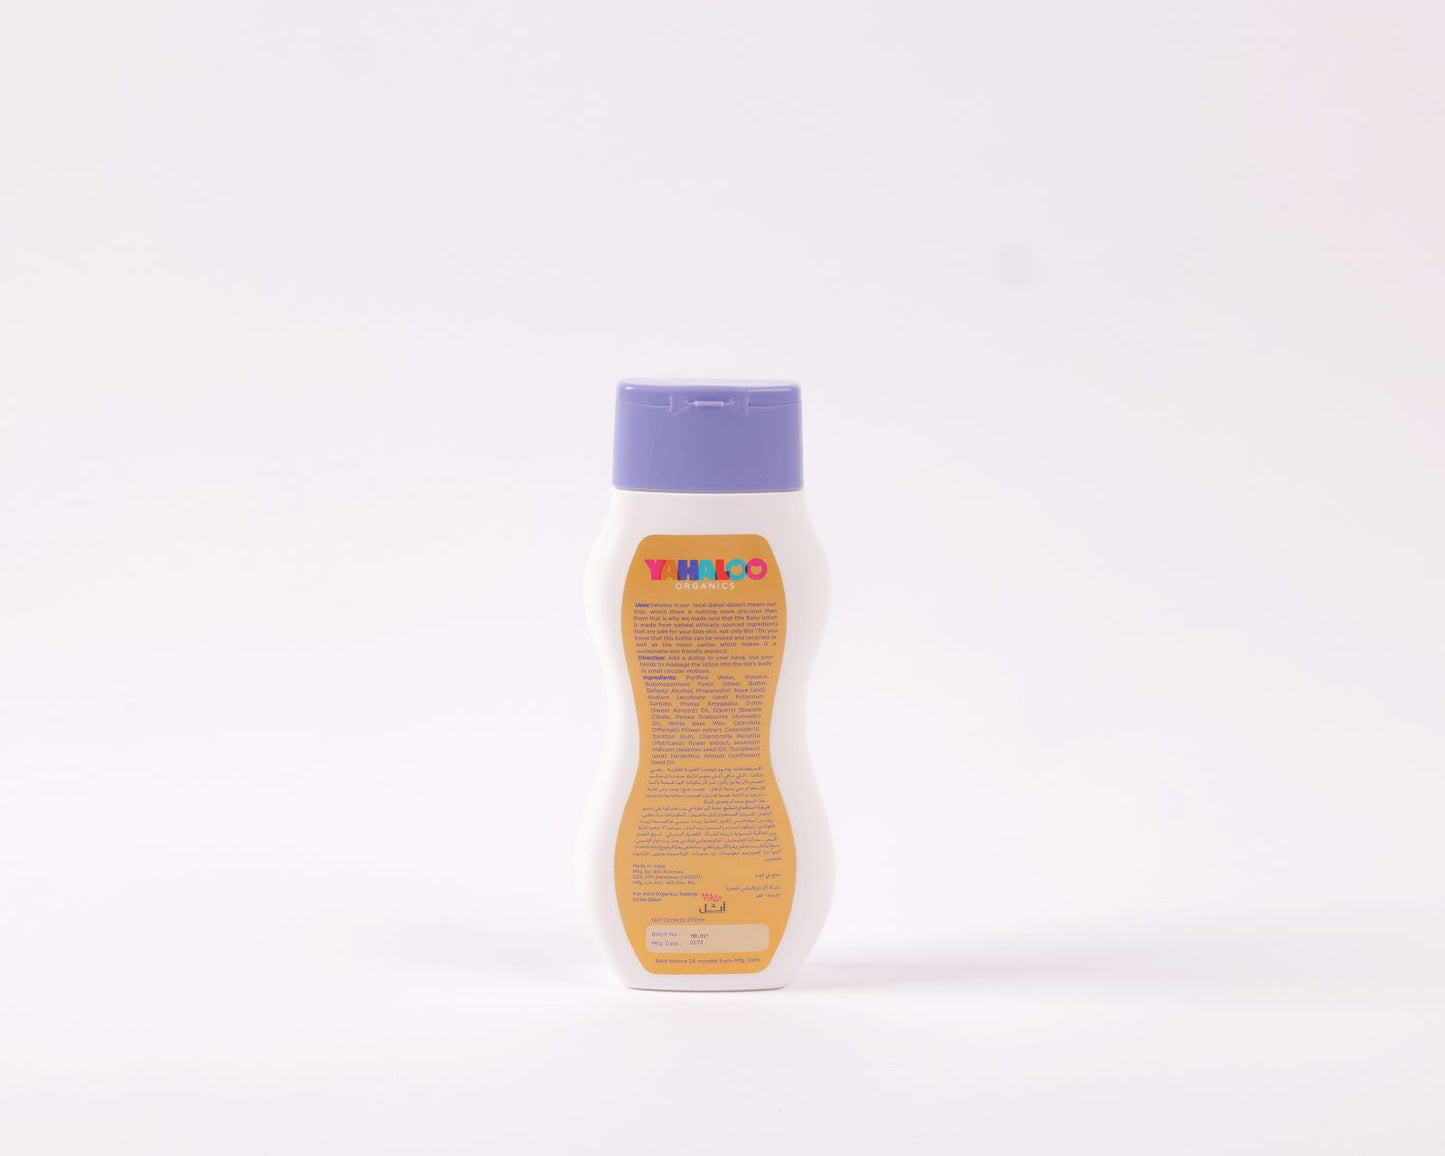 Baby Lotion For Kids